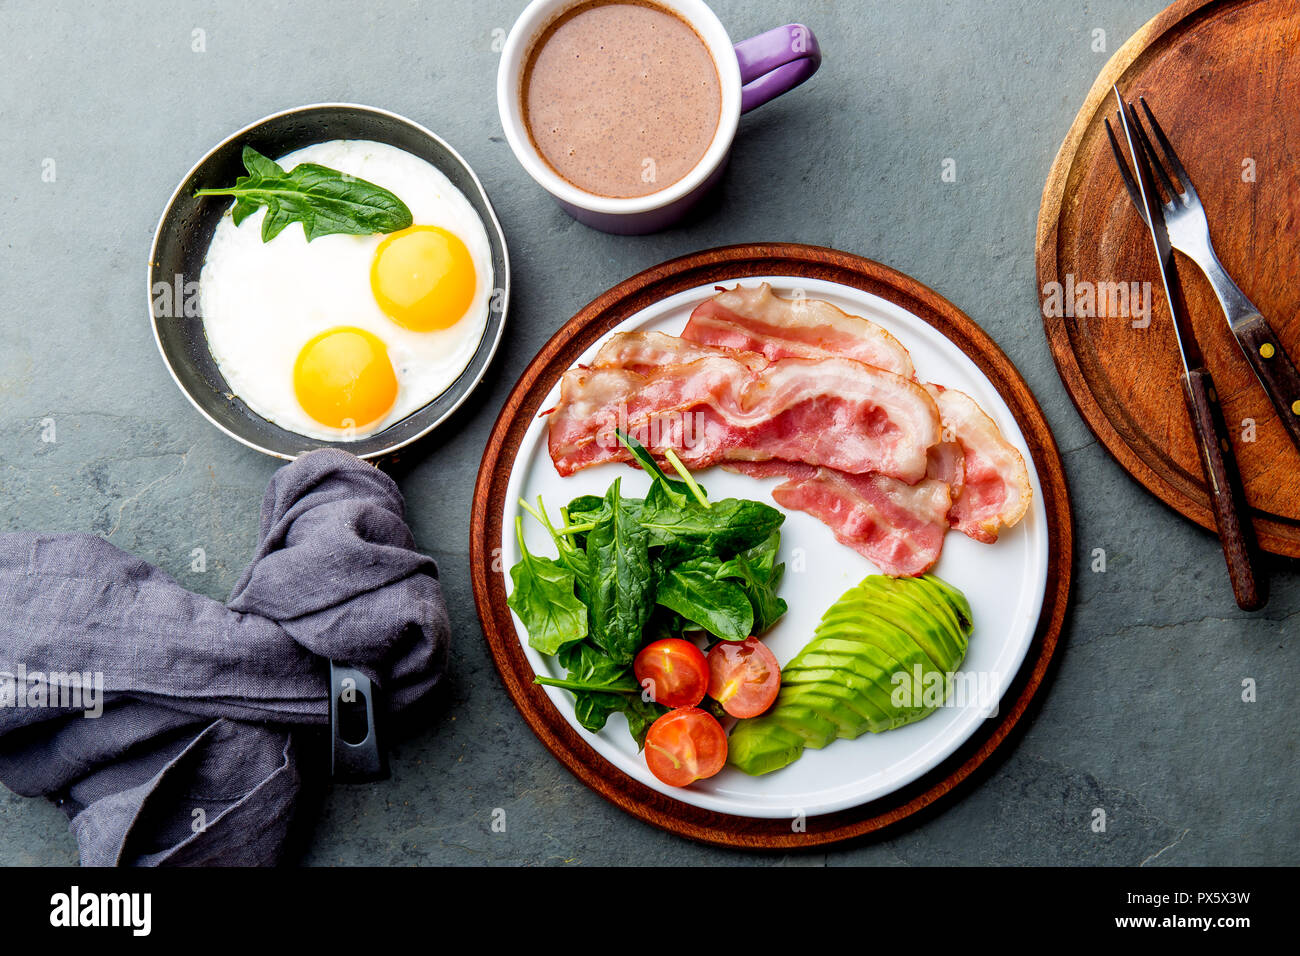 Ketogenic diet breakfast. fried egg, bacon and avocado, spinach and bulletproof coffee. Low carb high fat breakfast. Stock Photo